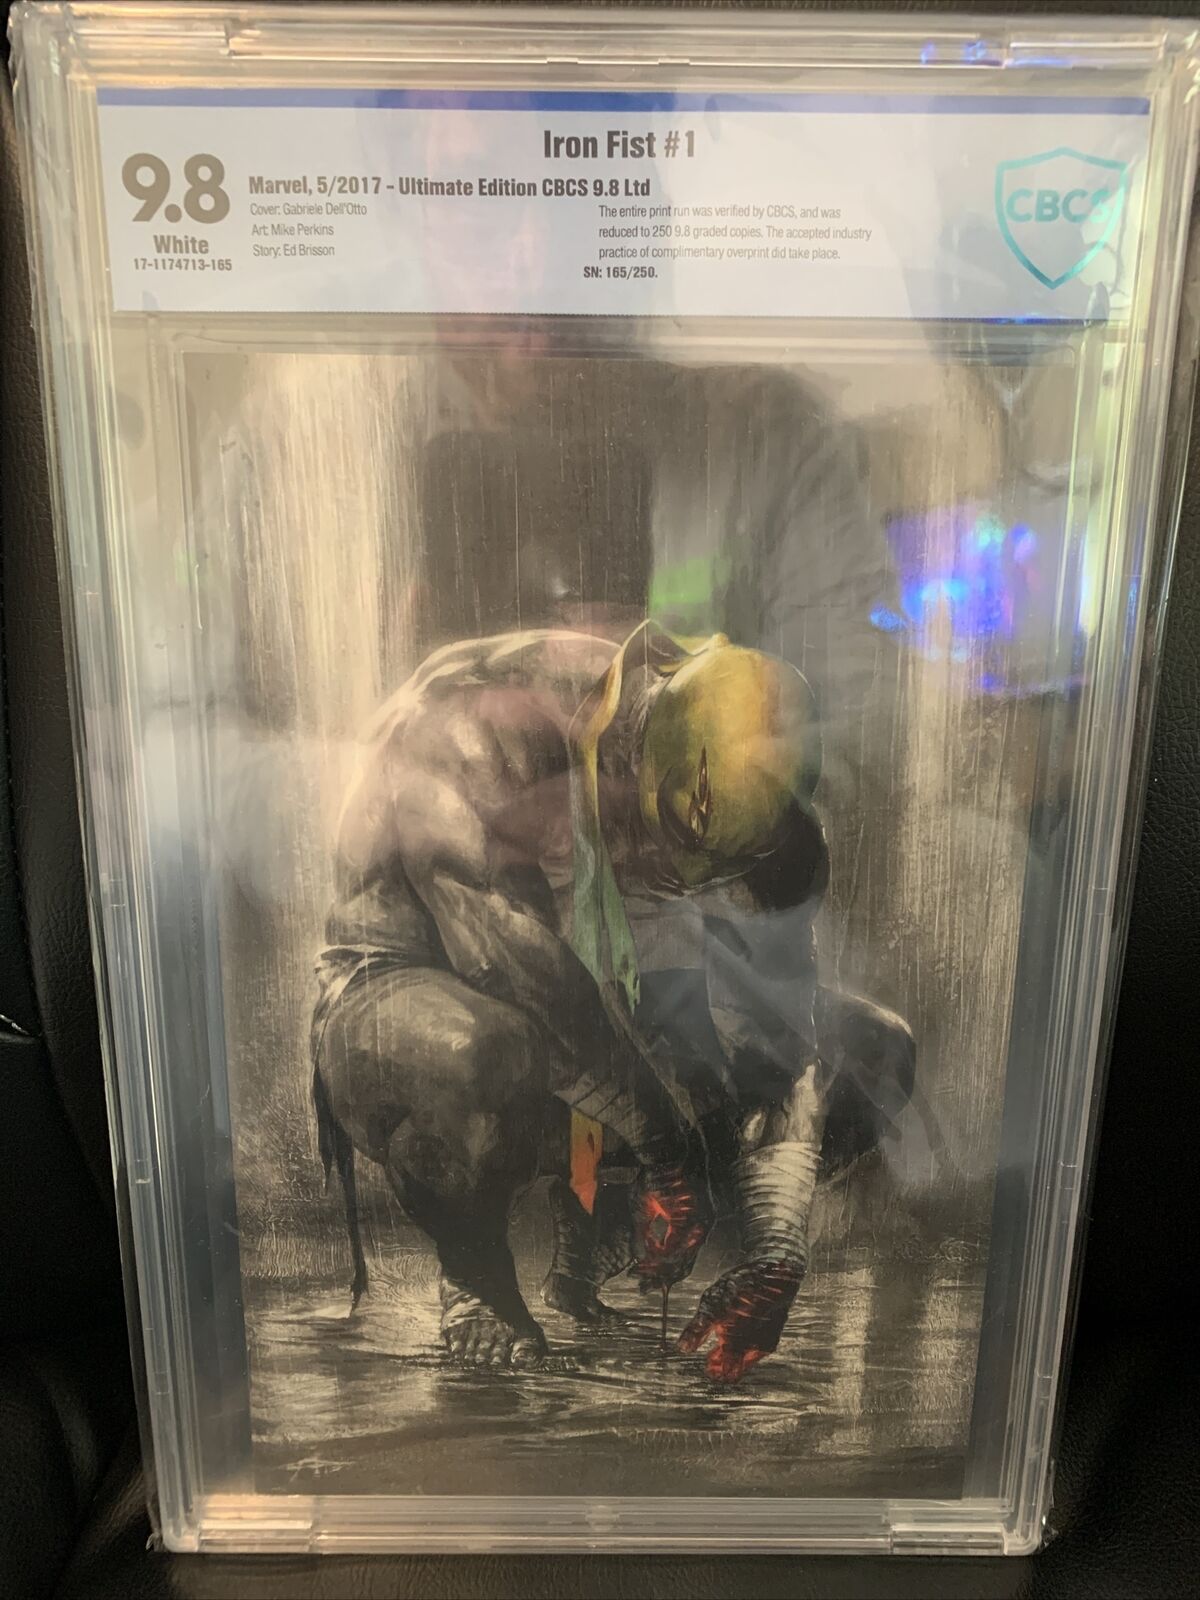 Iron Fist #1 ultimate edition CBCS 9.8 limited edition Gabriele Del’Otto variant